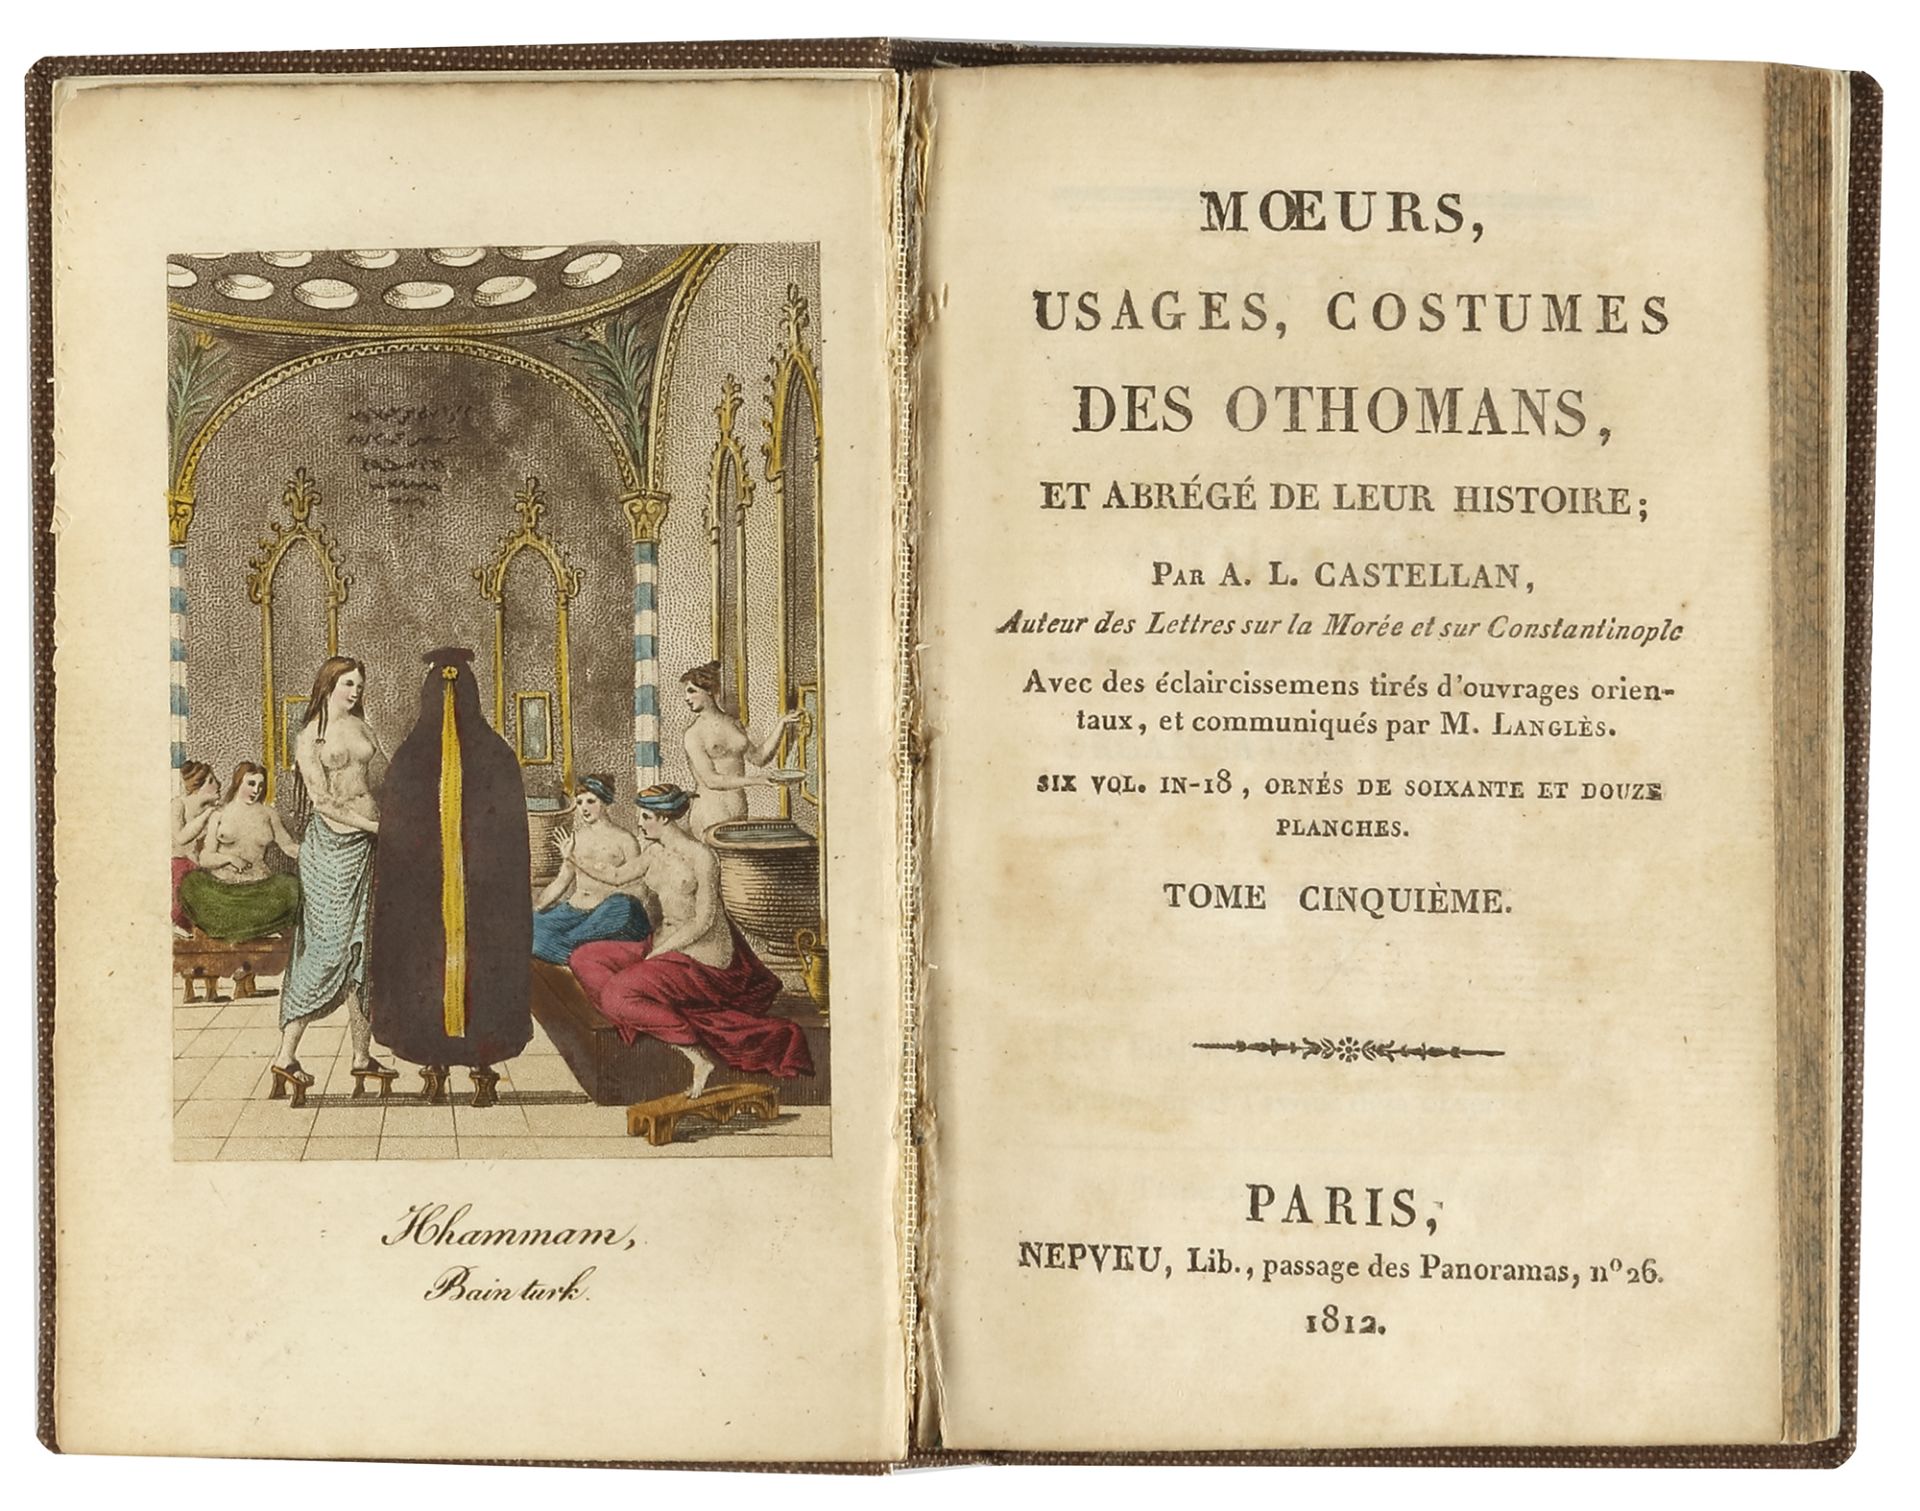 HISTORY OF THE OTTOMAN MANNERS AND CUSTOMS, PARIS AND DATED 1812 - Image 5 of 6